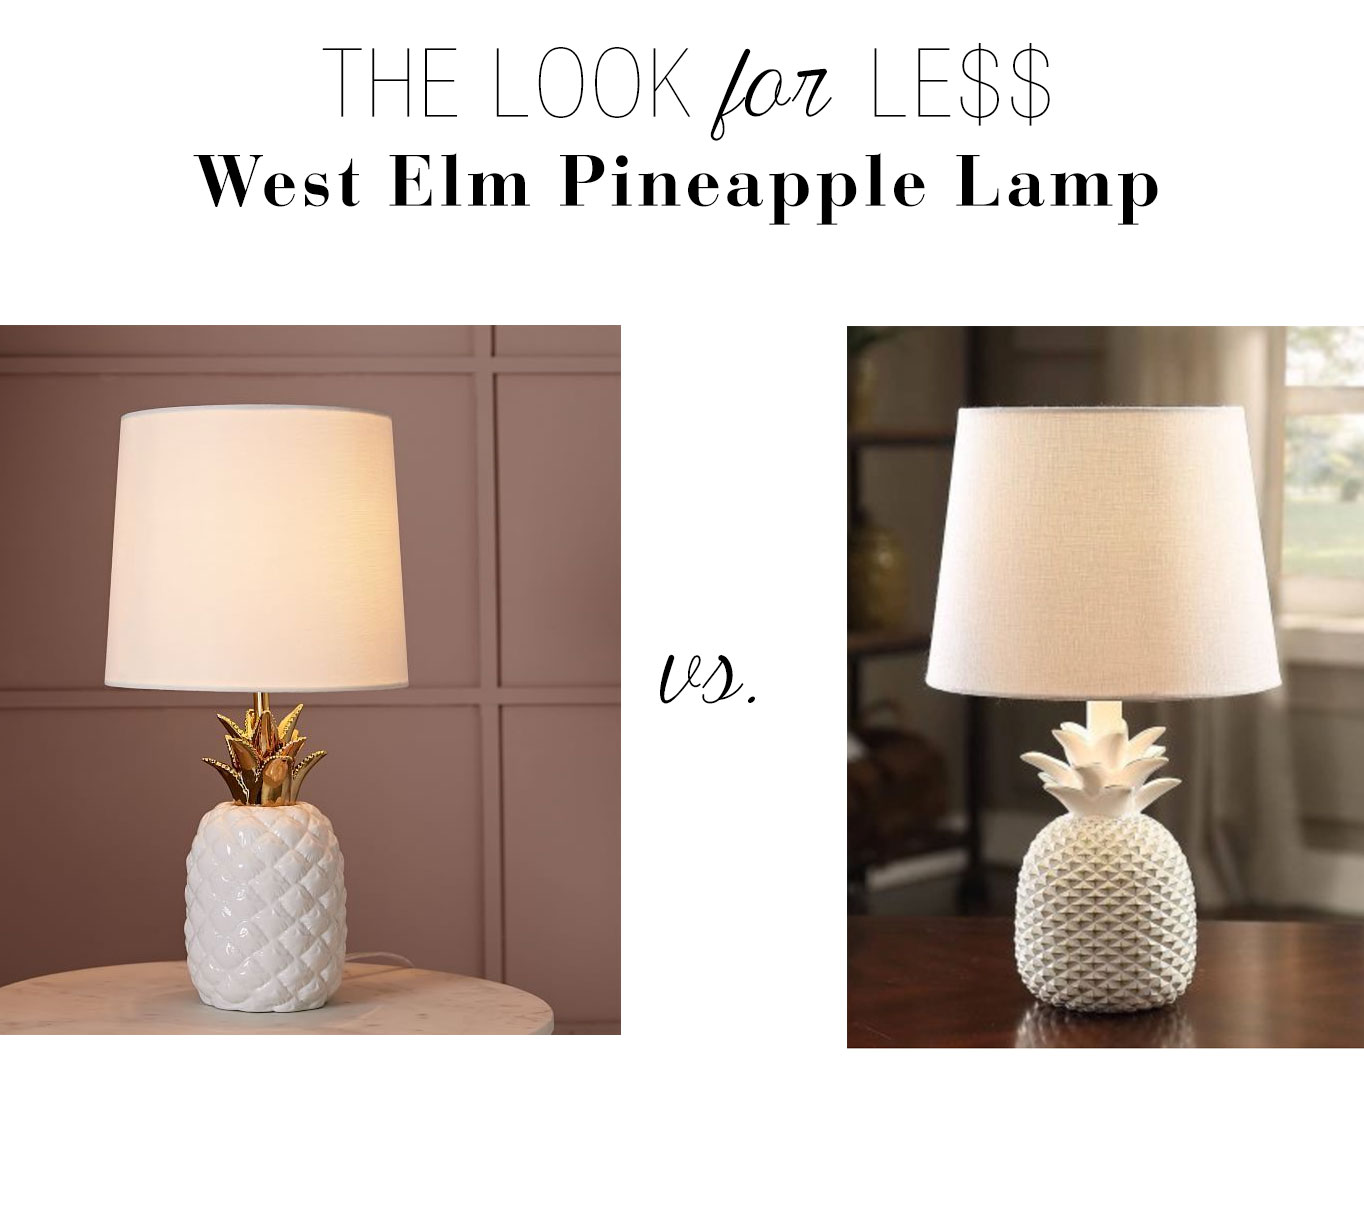 Add a stylish pineapple lamp to your decor from West Elm or the Better Homes and Gardens collection at Walmart (yes, Walmart!)